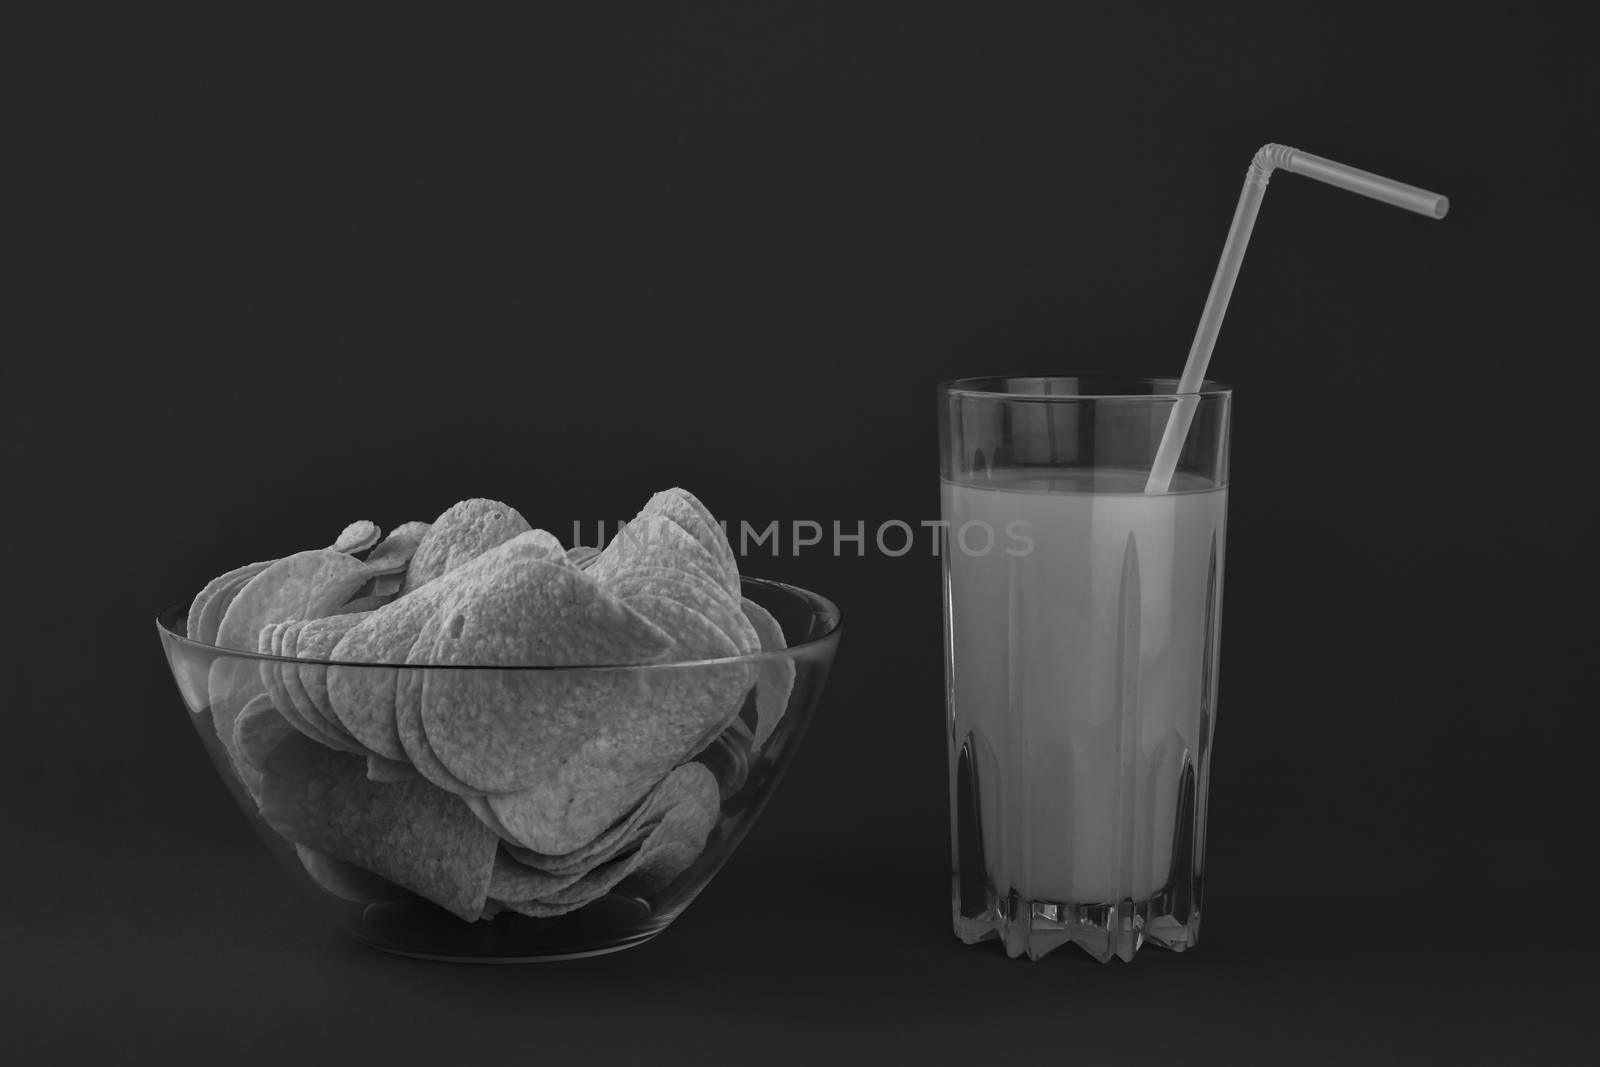 Bowl of potato chips and glass of orange drink in dark monochrome background. Minimalistic image of attention grabbing snacks and beverage